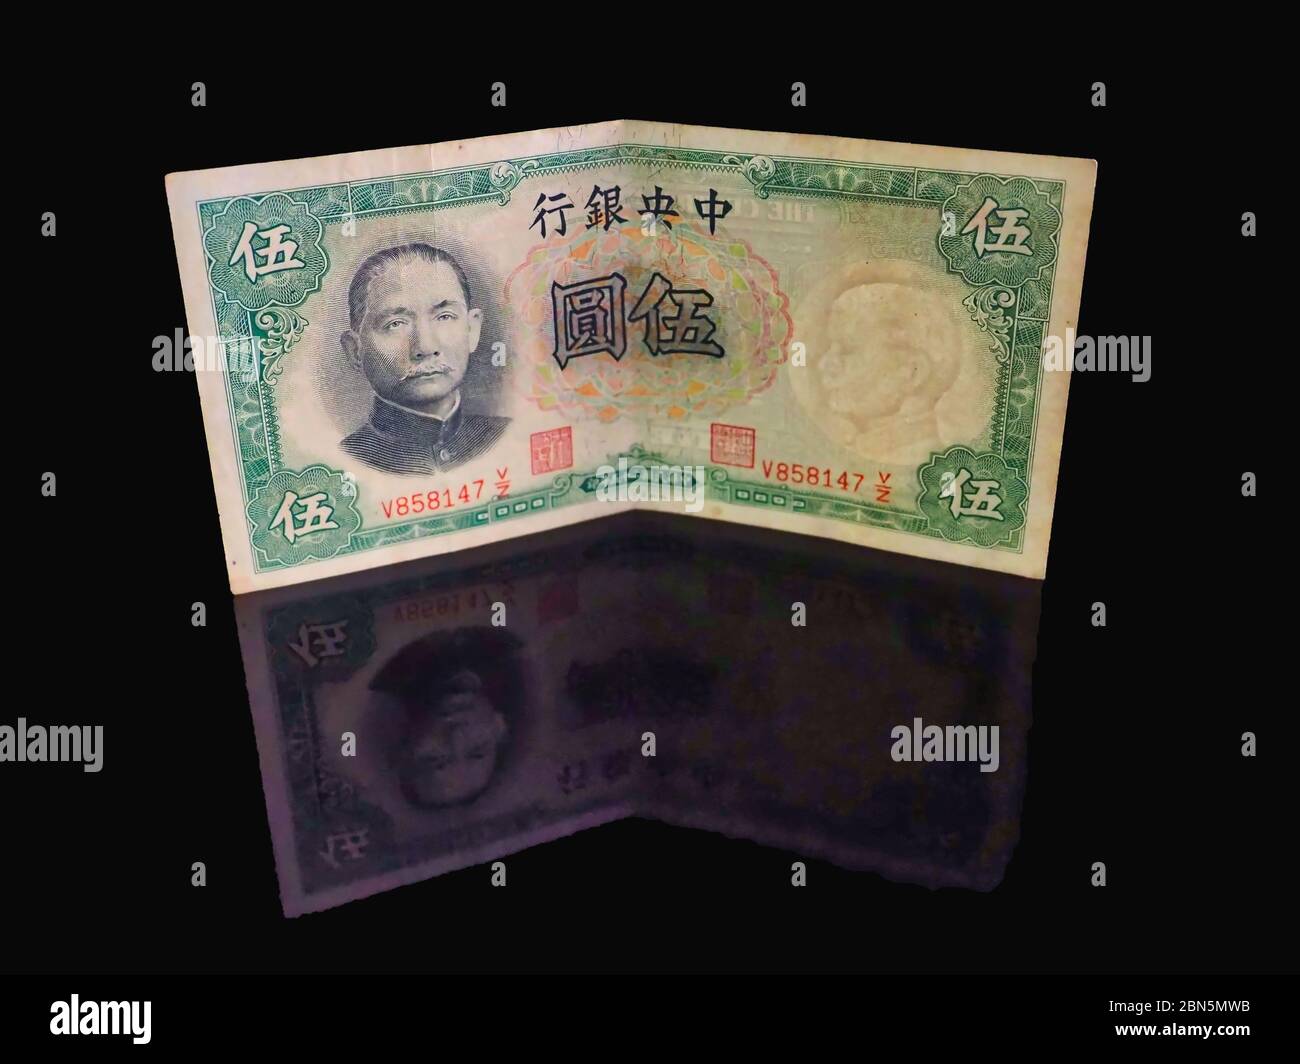 An old China bank notes issued in 1936 with the portrait of Sun Yat-sen, the formal President of the Republic of China. Collection. Stock Photo